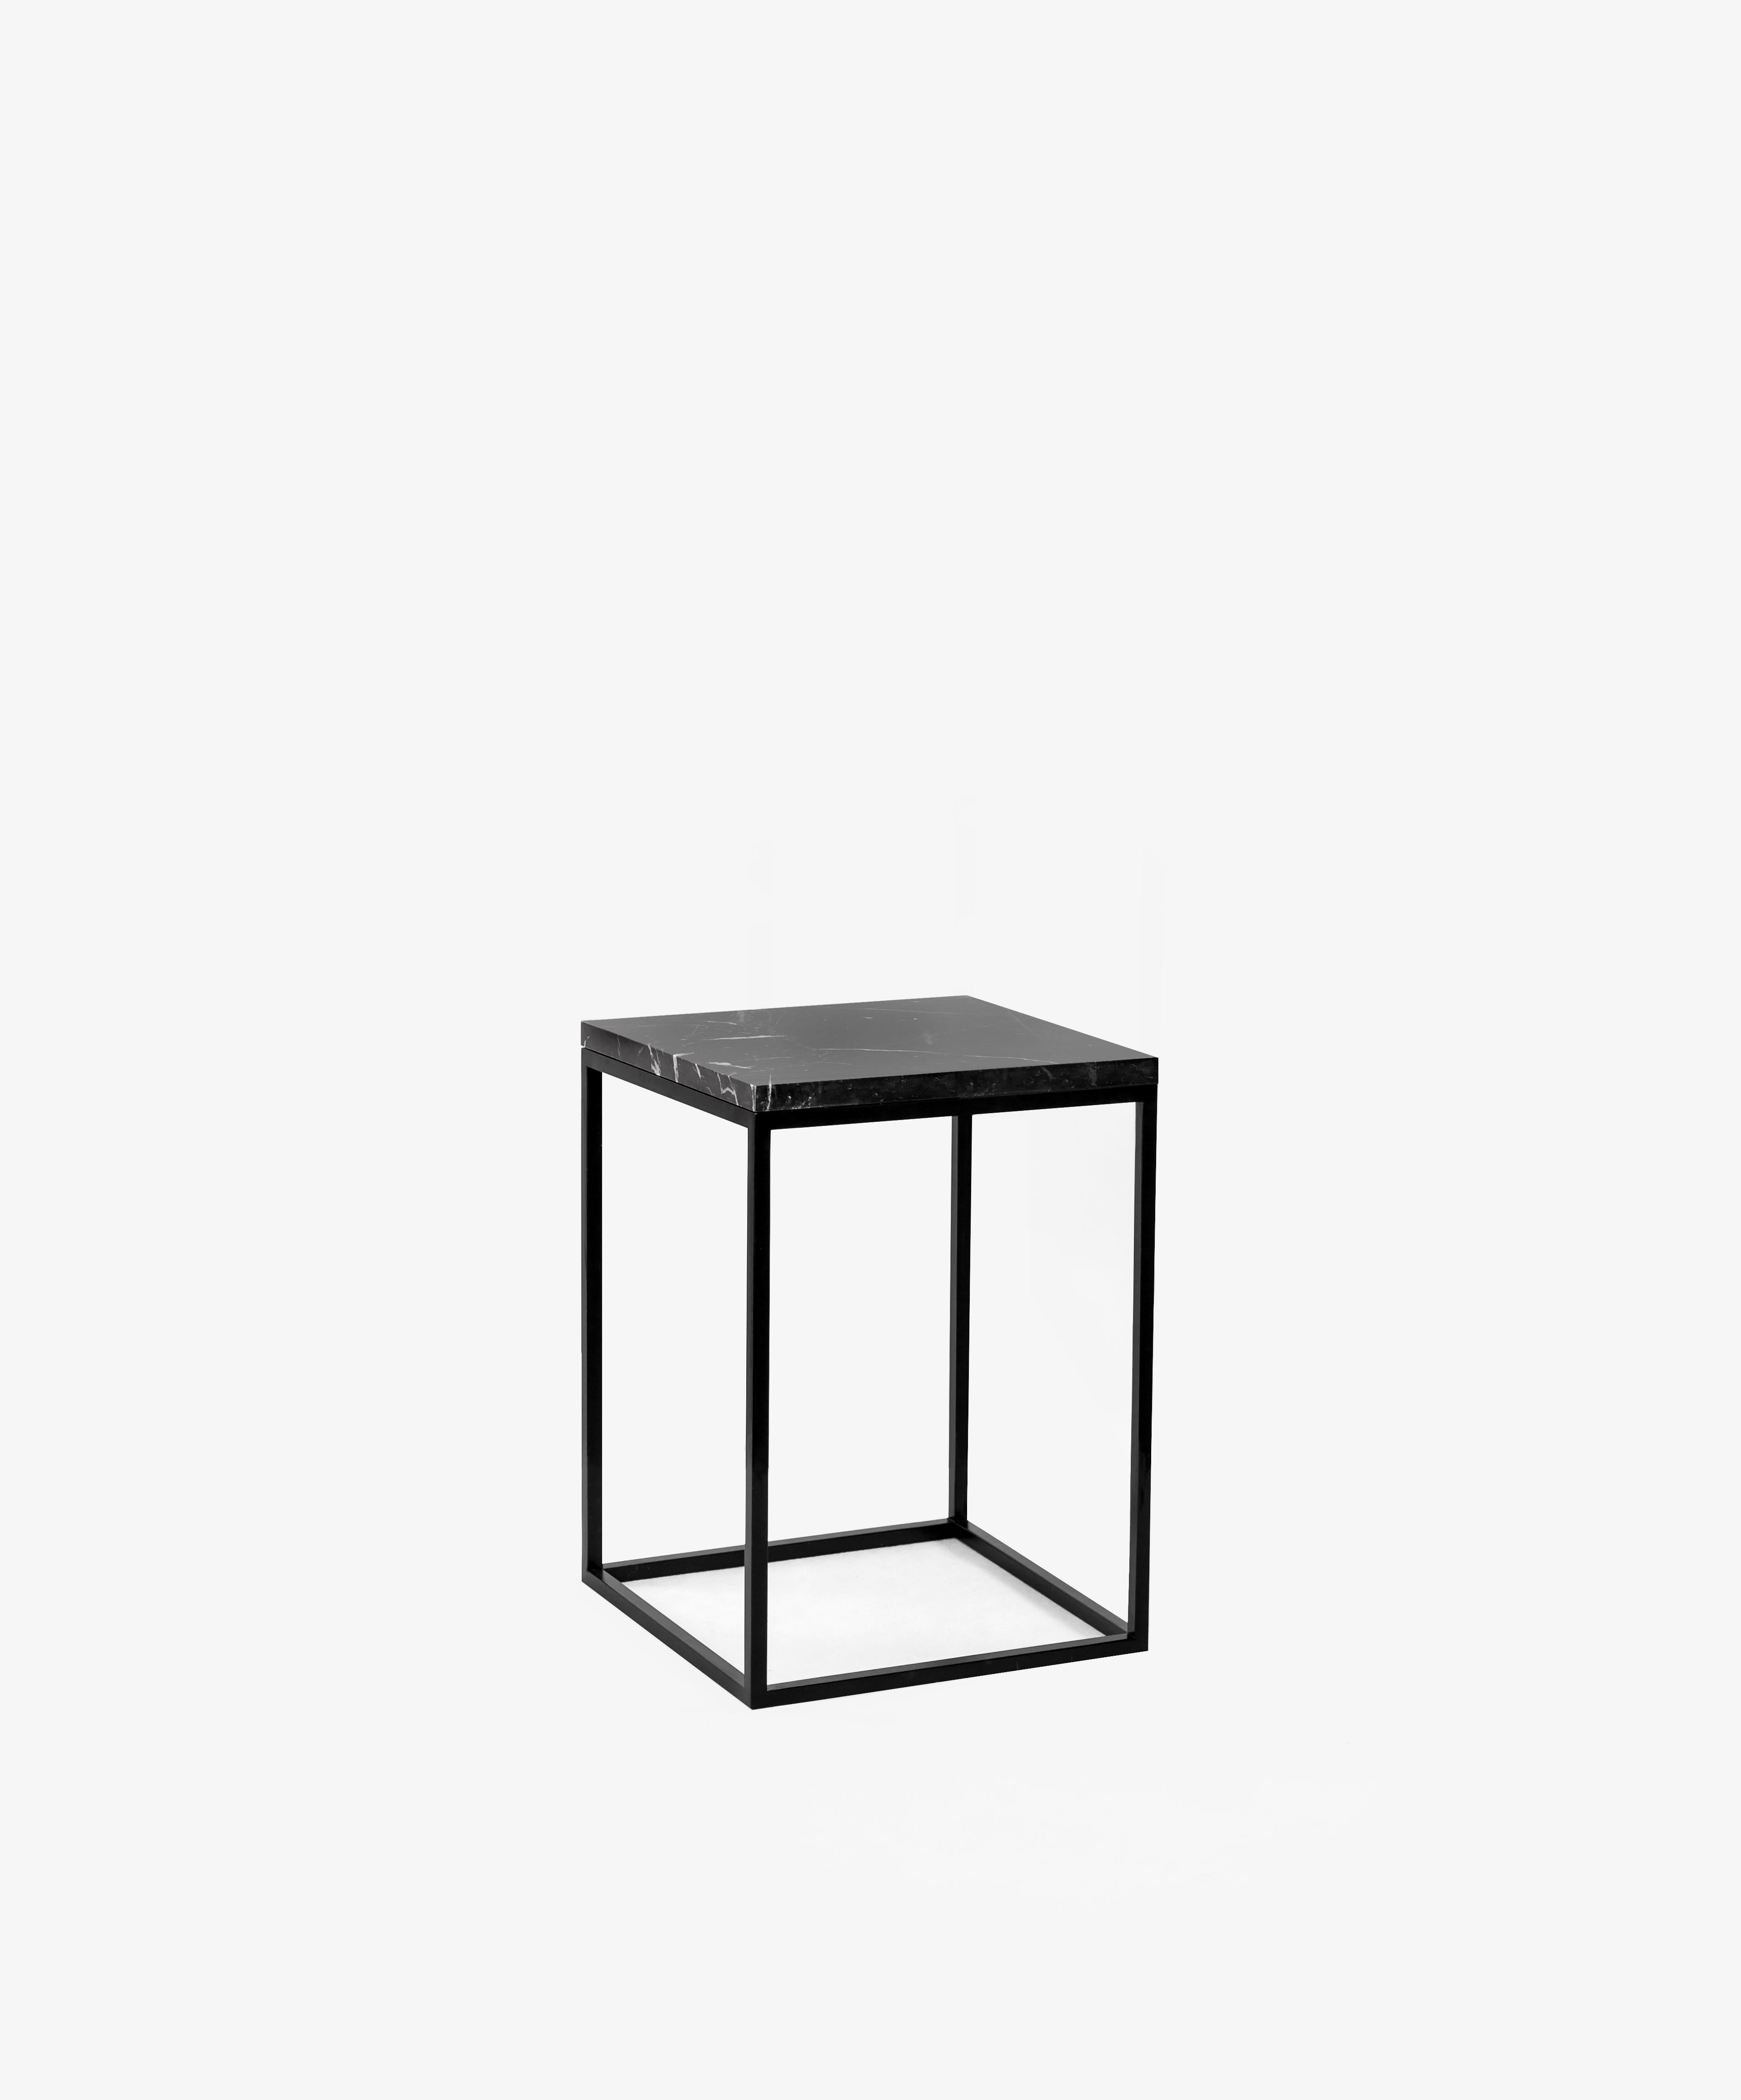 Post-Modern Set of 2 Small and Medium Pillar Side Tables by Un’common